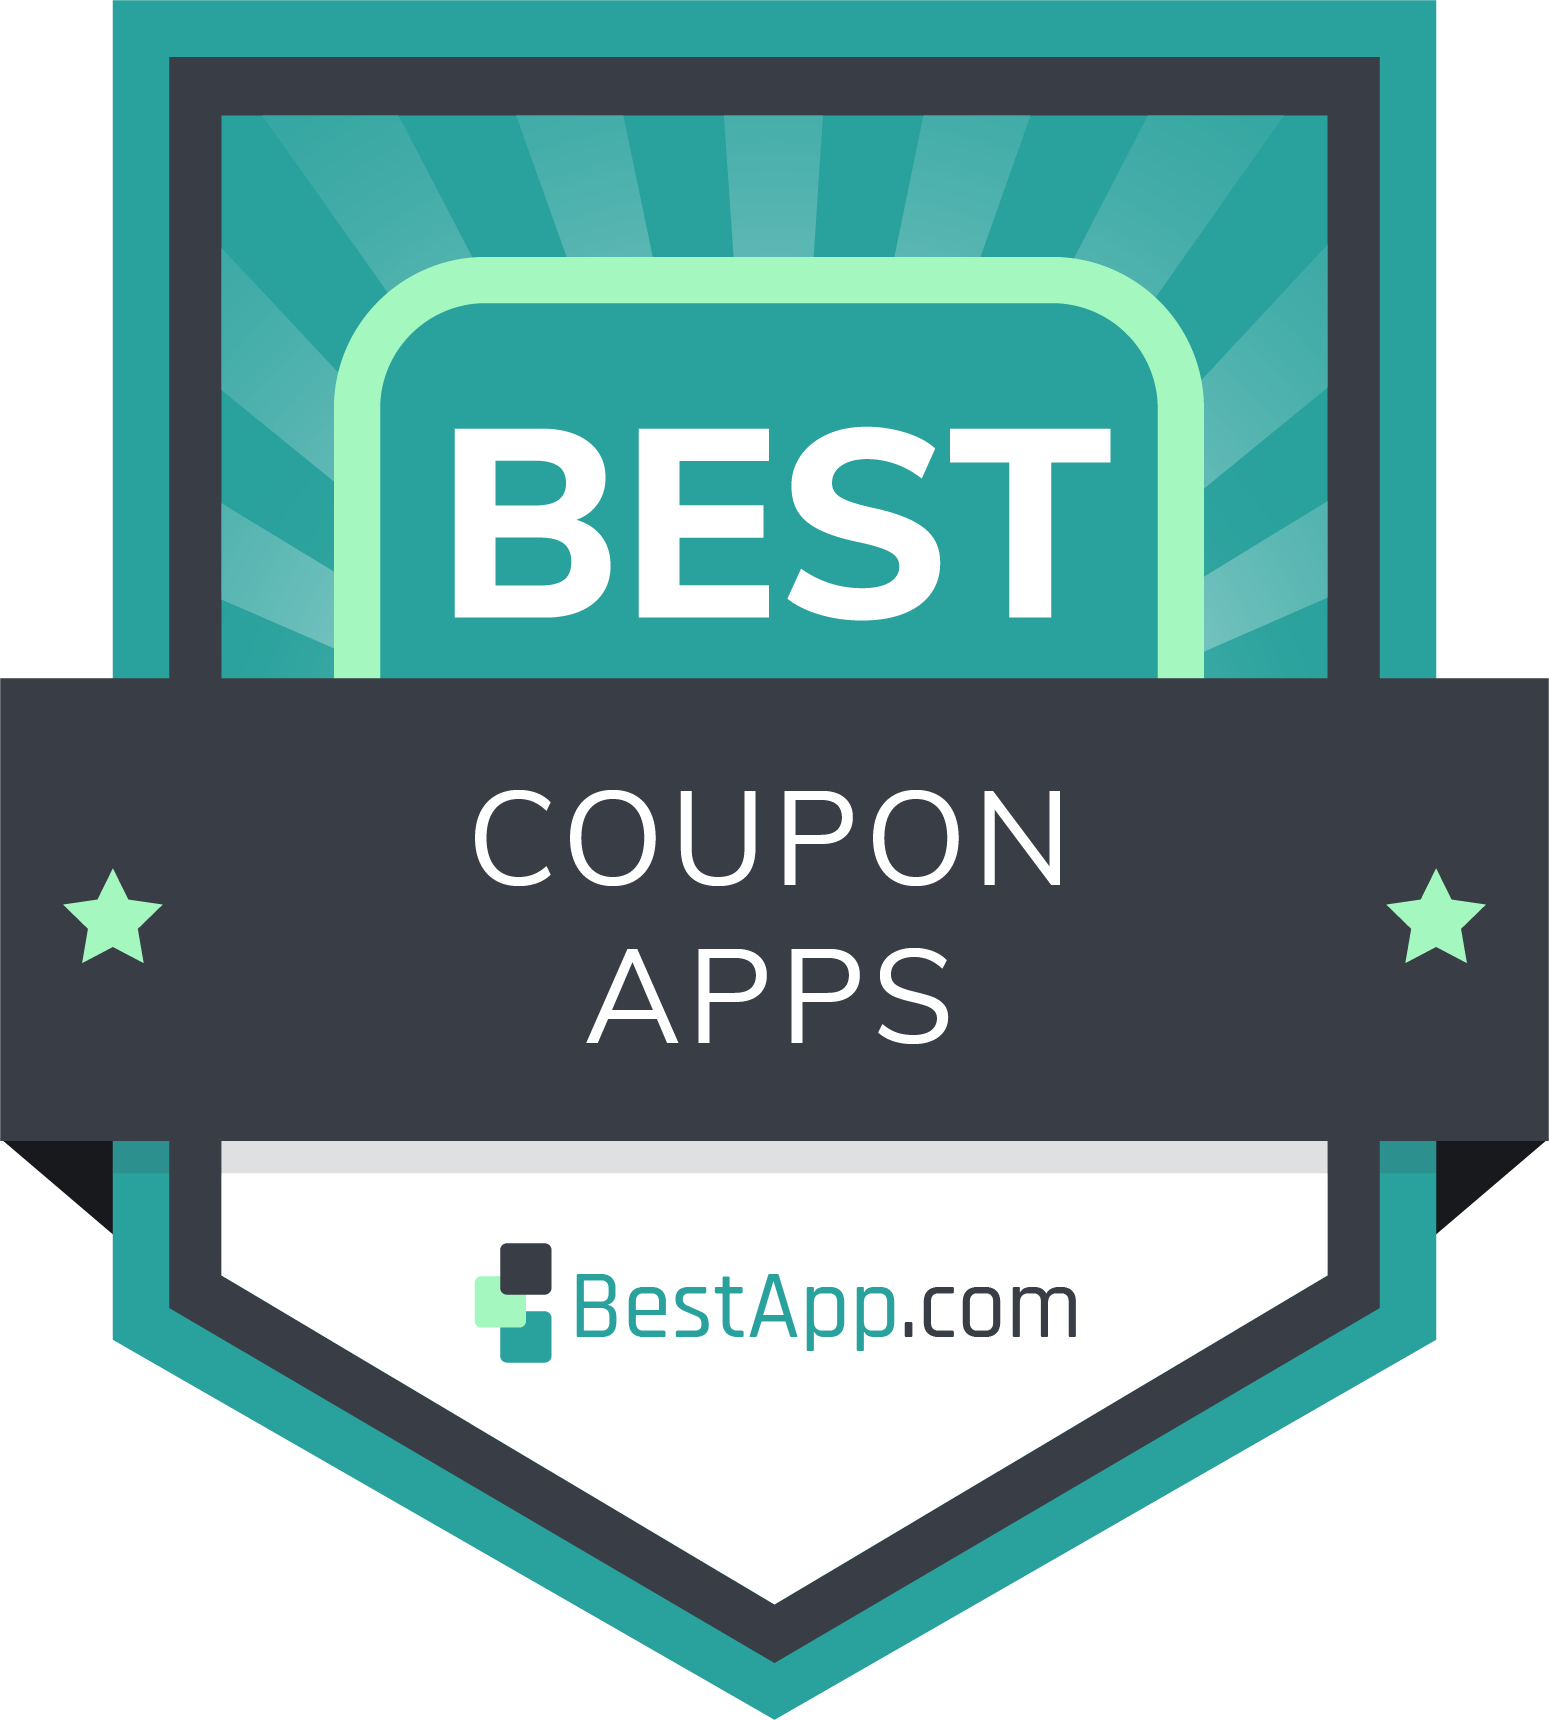 Best Coupon Apps Badge